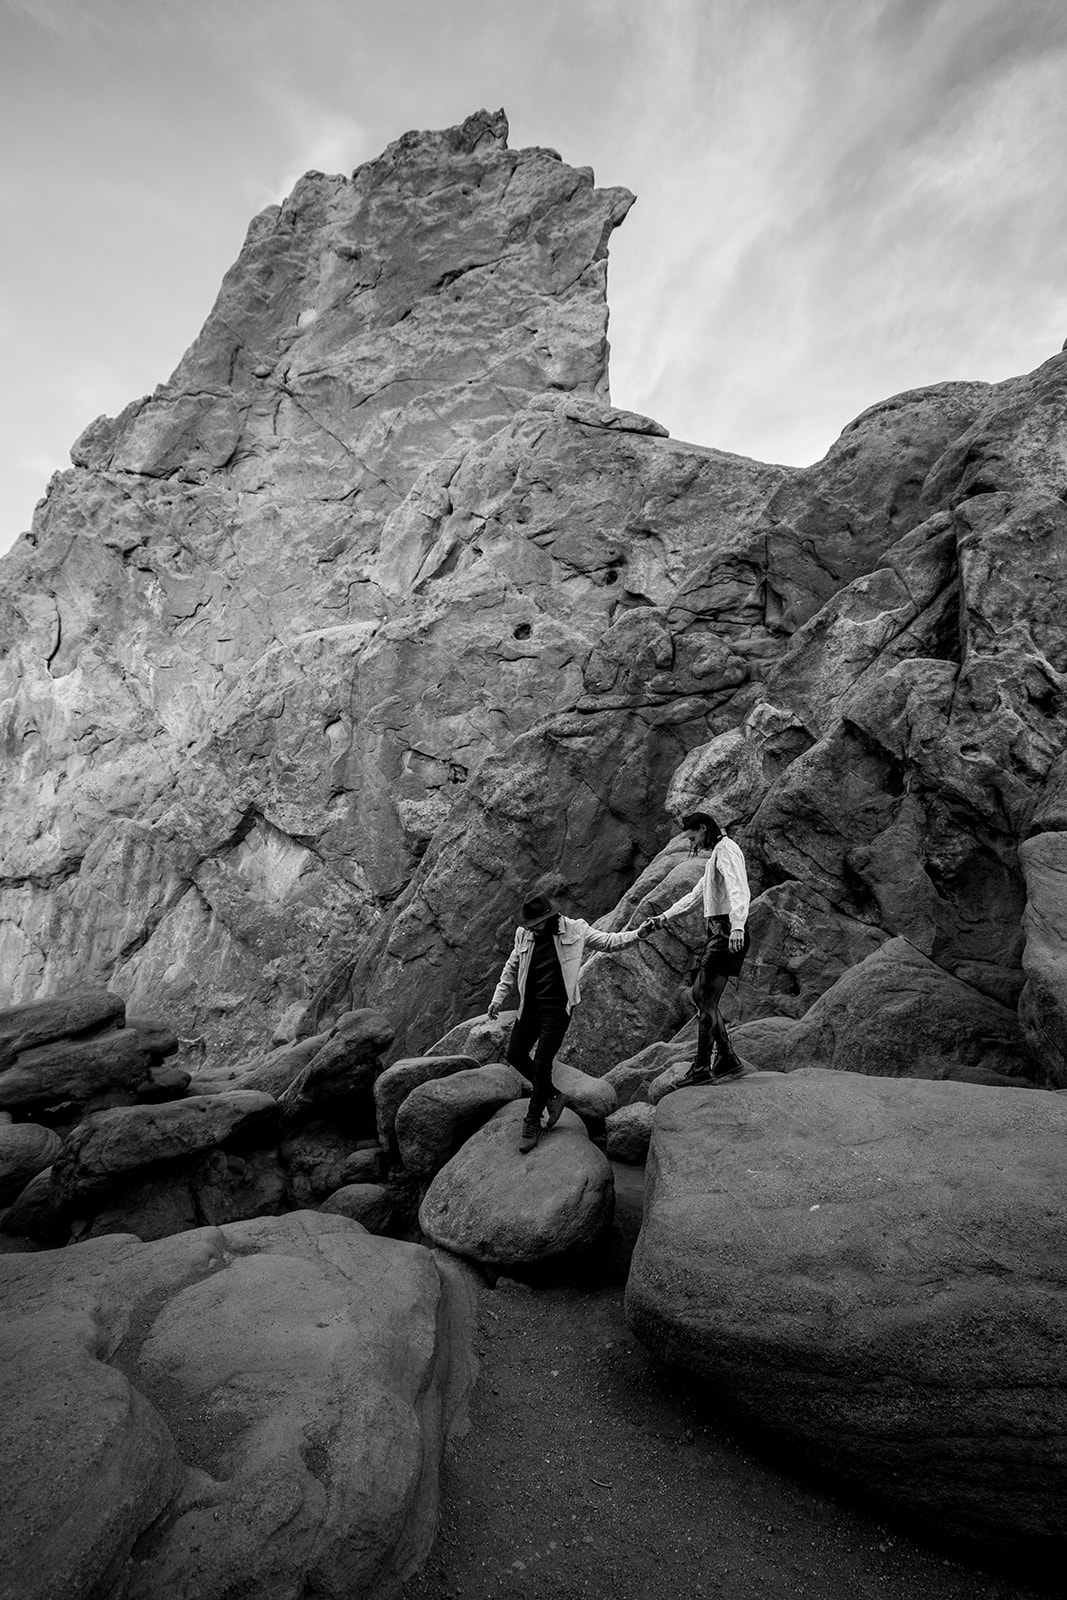 Newly engaged couple exploring the garden of the gods in black and white